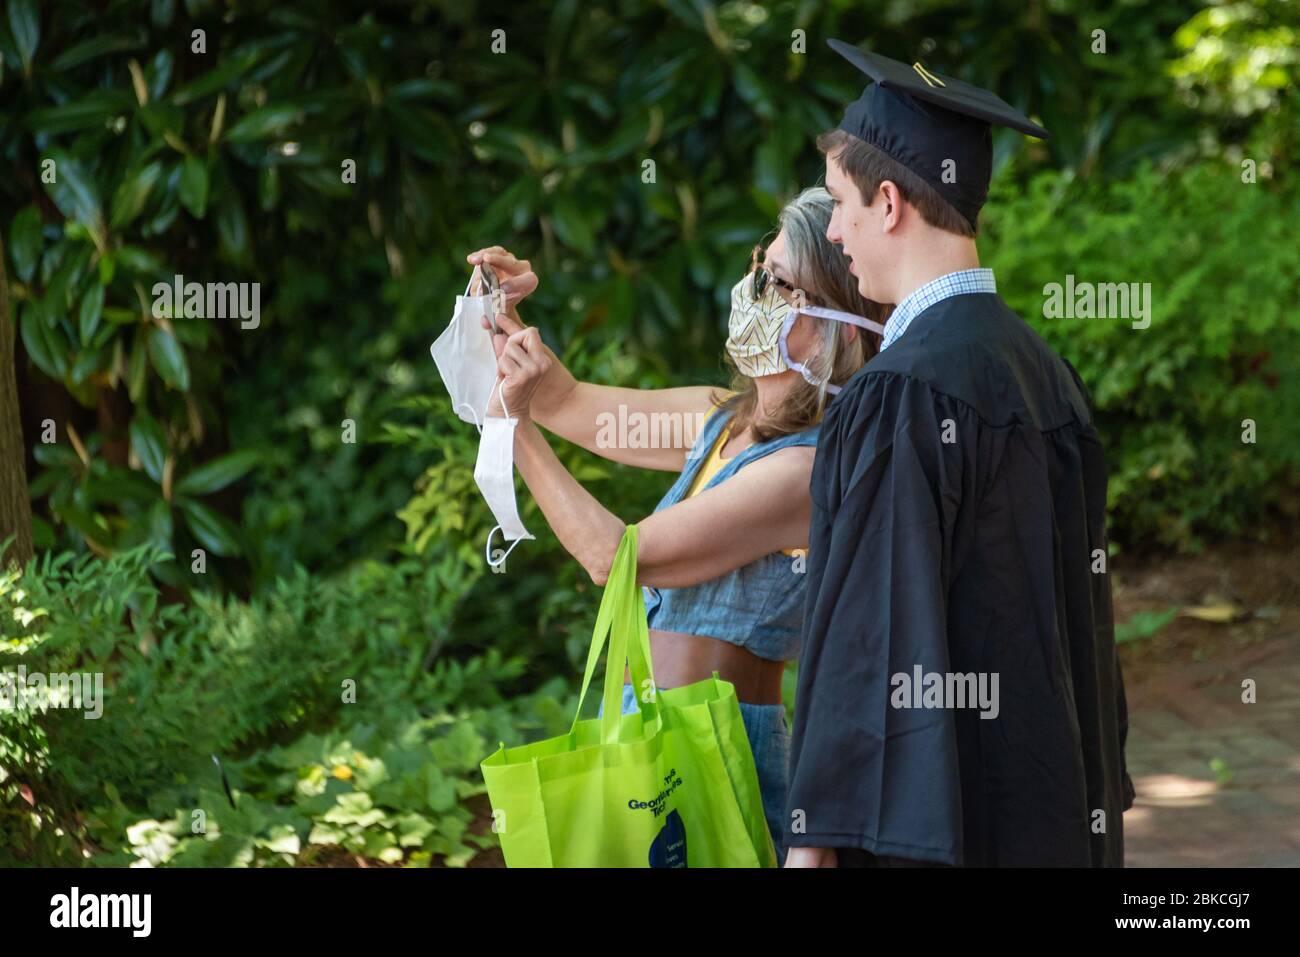 Mother with face mask and college graduate son get a selfie together at Georgia Tech in Atlanta, Georgia during the coronavirus pandemic. (USA) Stock Photo